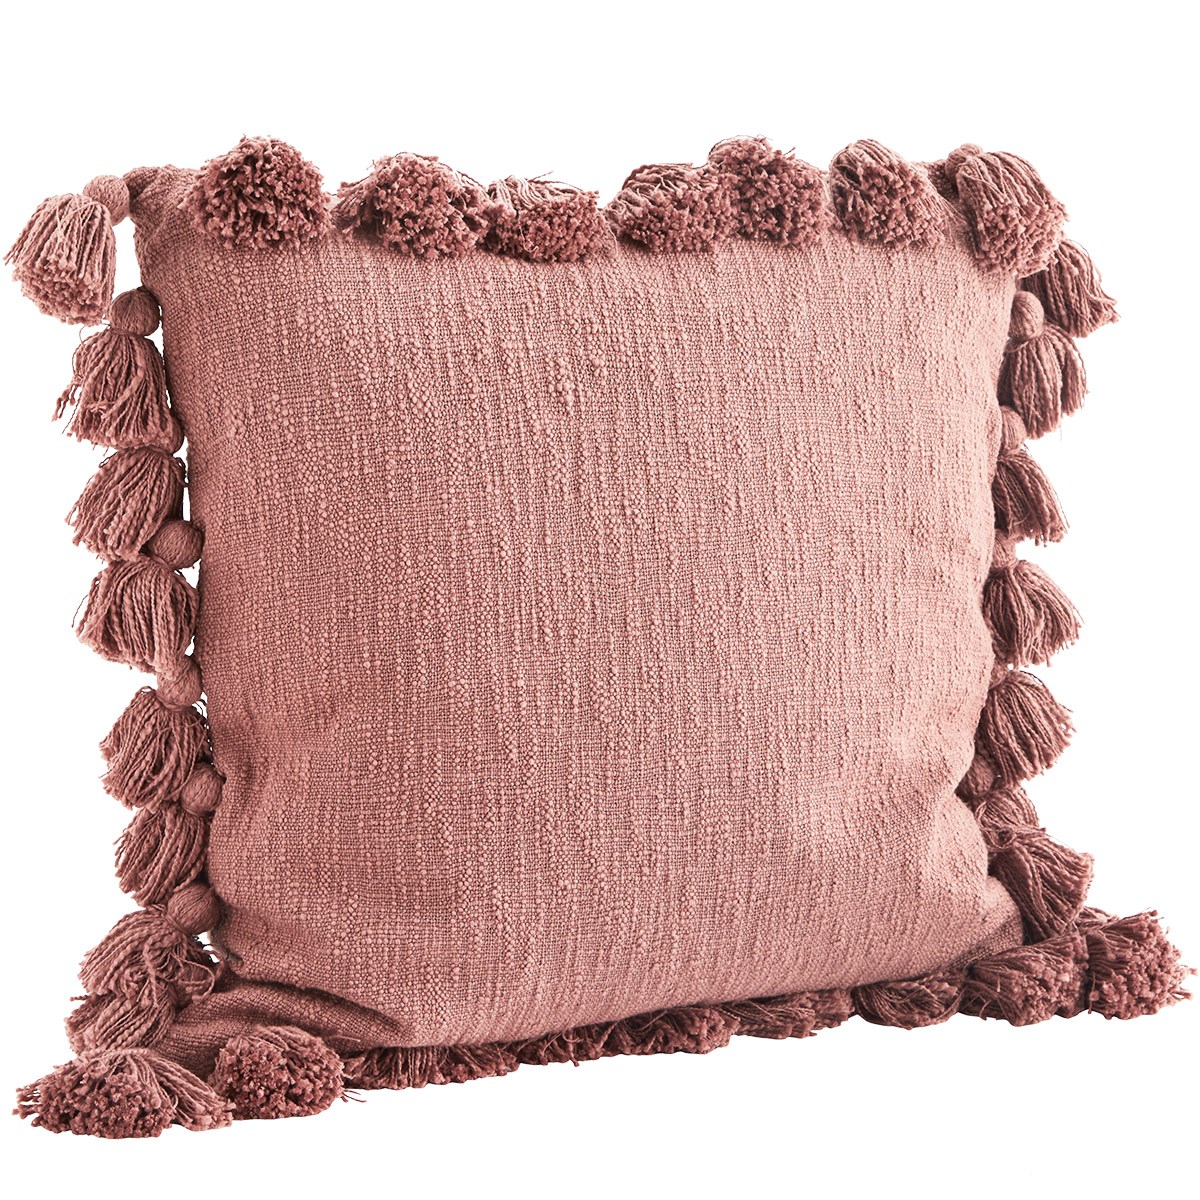 Cushion cover with tassels 60x60 cm, Rose